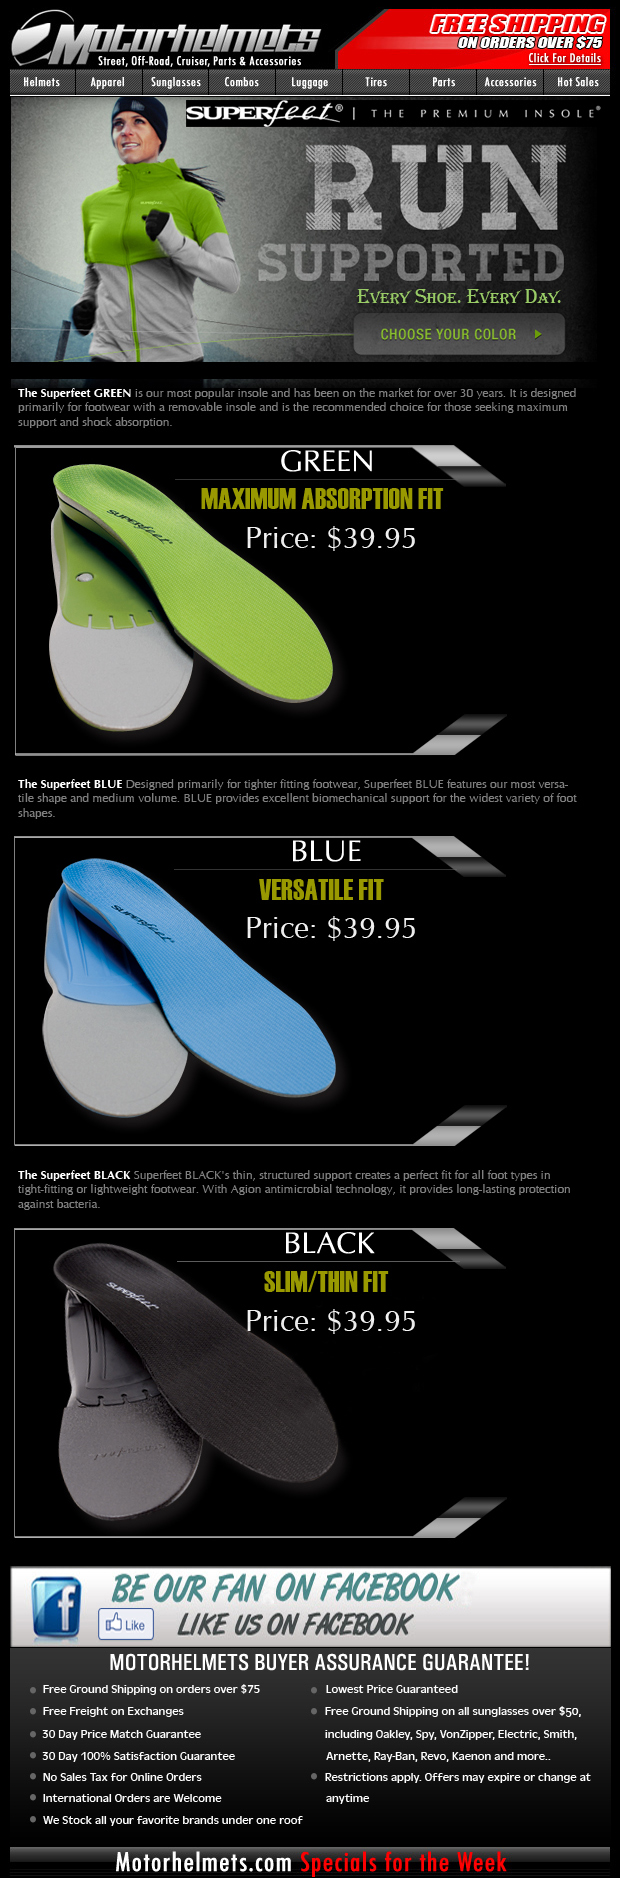 Introducing the Superfeet Premium Insoles...Available in 3 Colors!